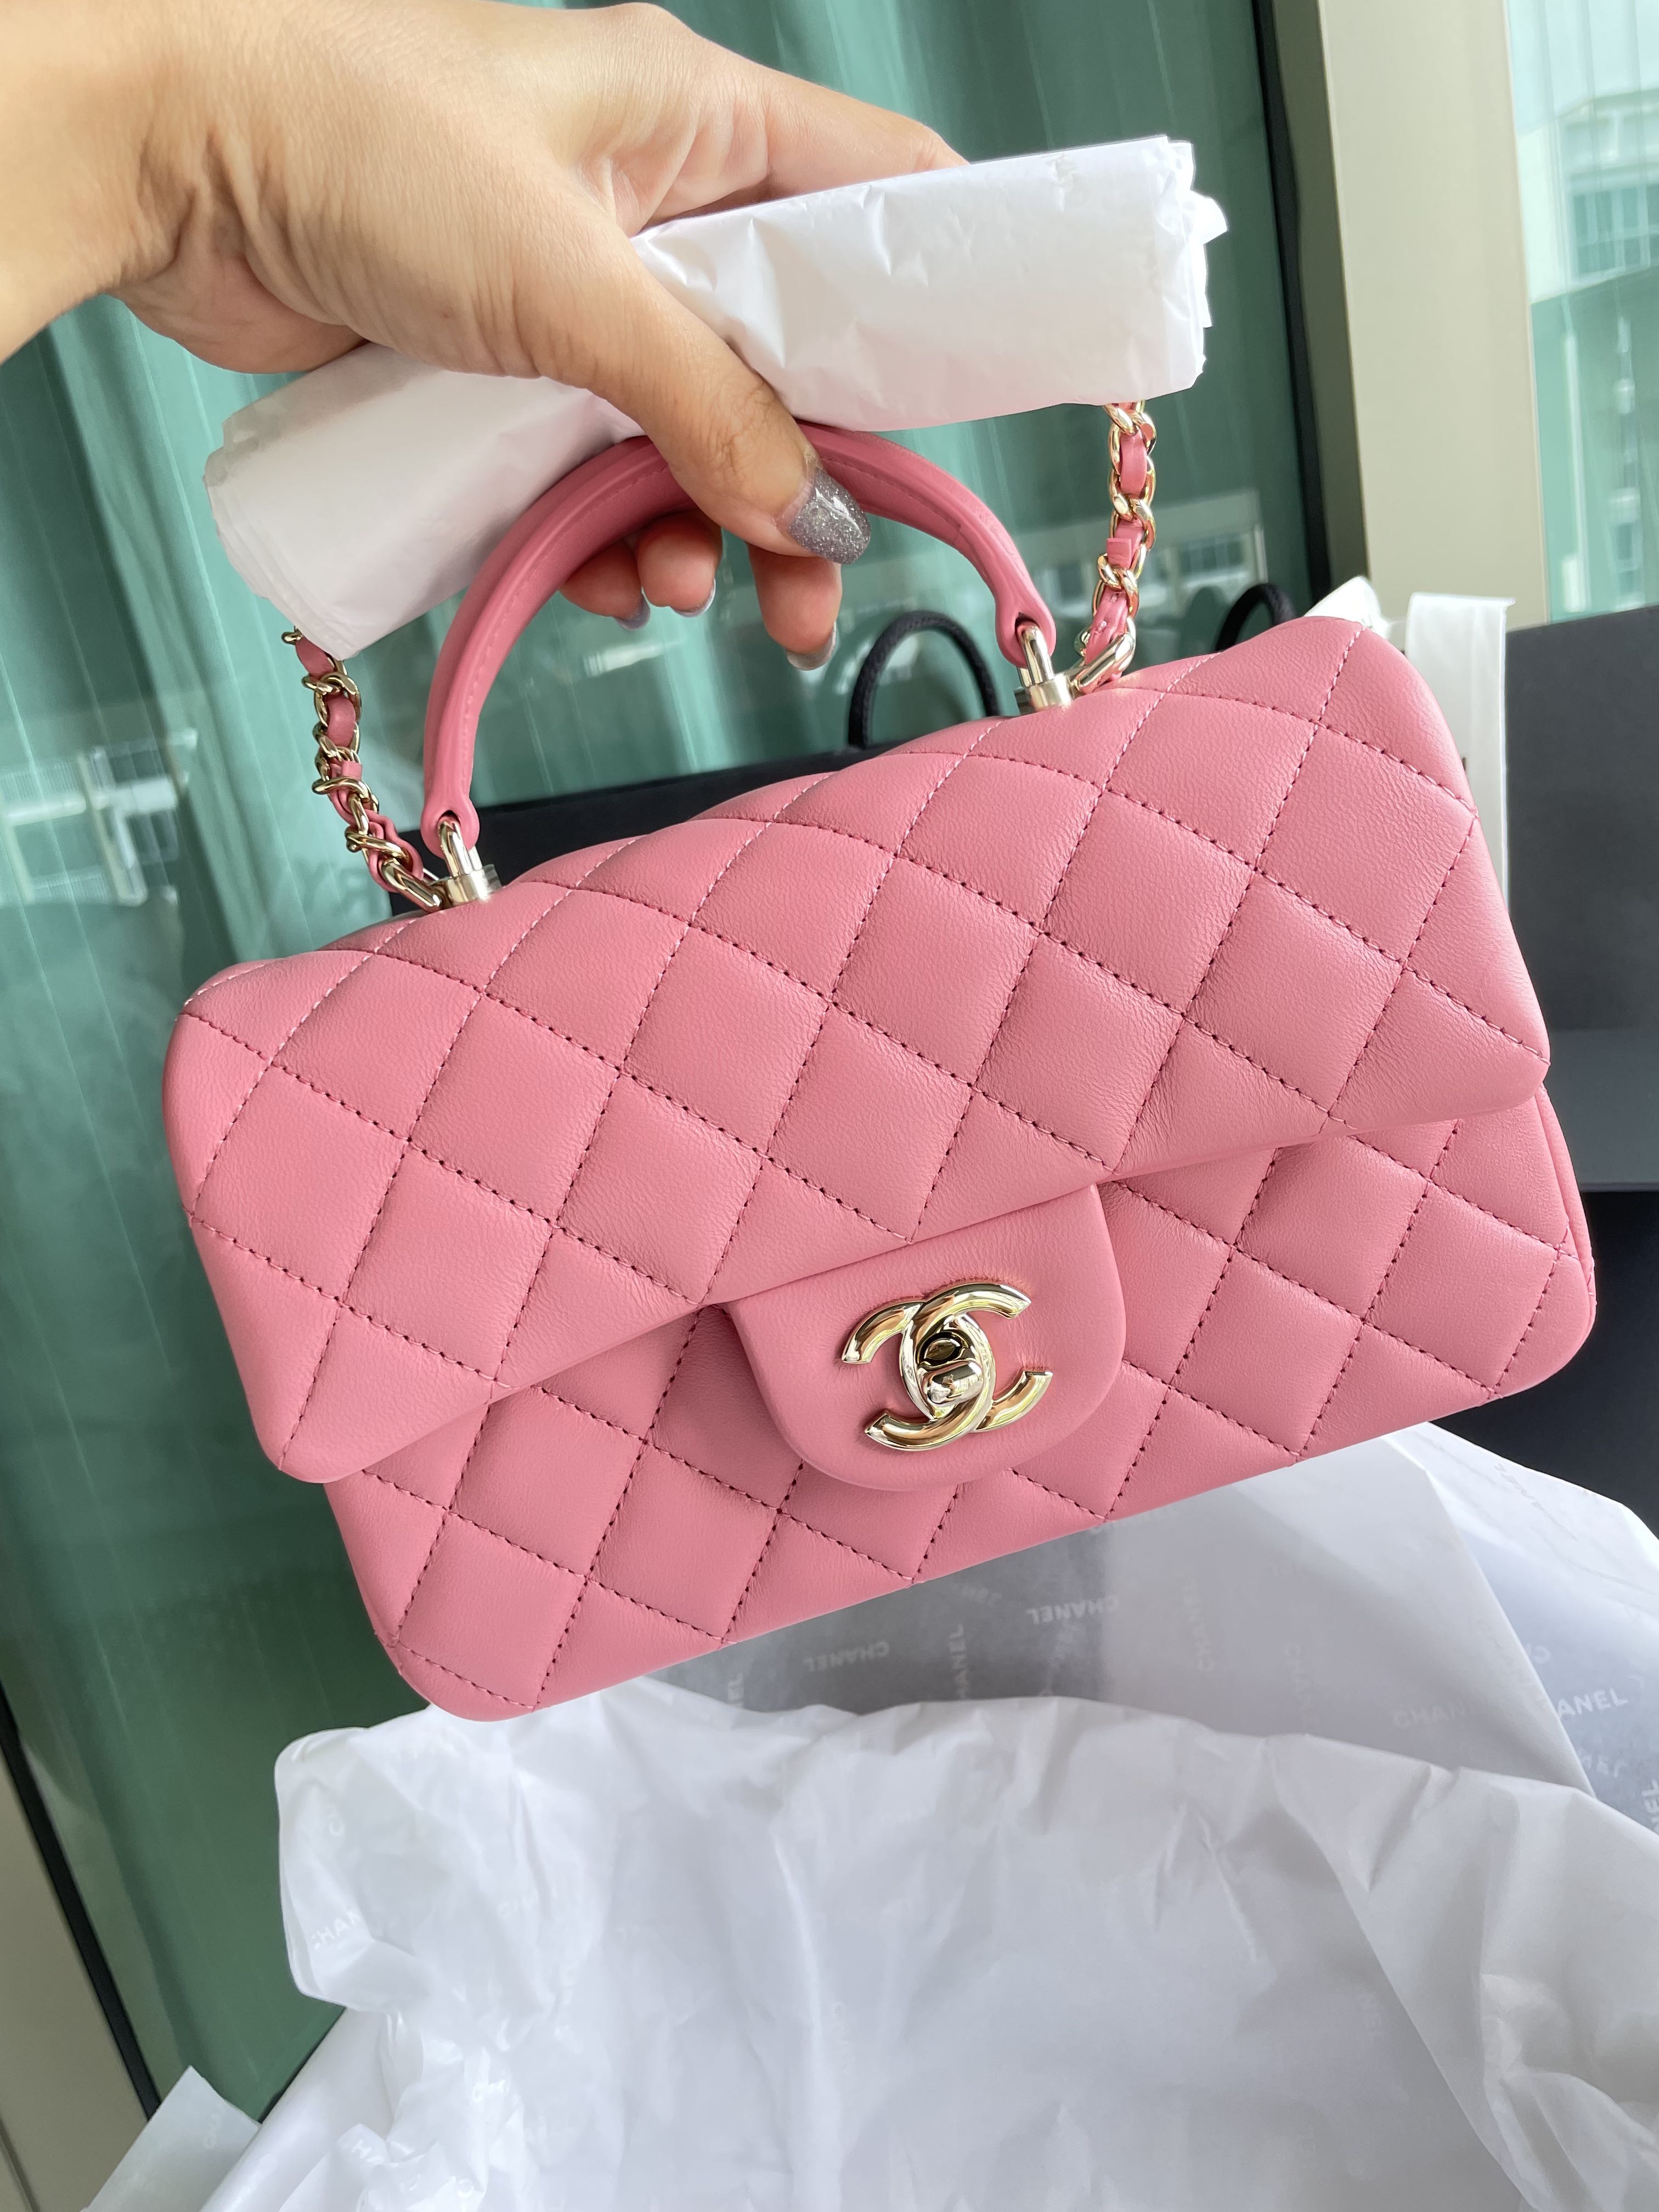 used Pre-owned Chanel Top Handle Mini Flap Bag 2 Way Pink Gold Hardware As2431 (Good), Adult Unisex, Size: (HxWxD): 12cm x 20cm x 6.5cm / 4.72'' x